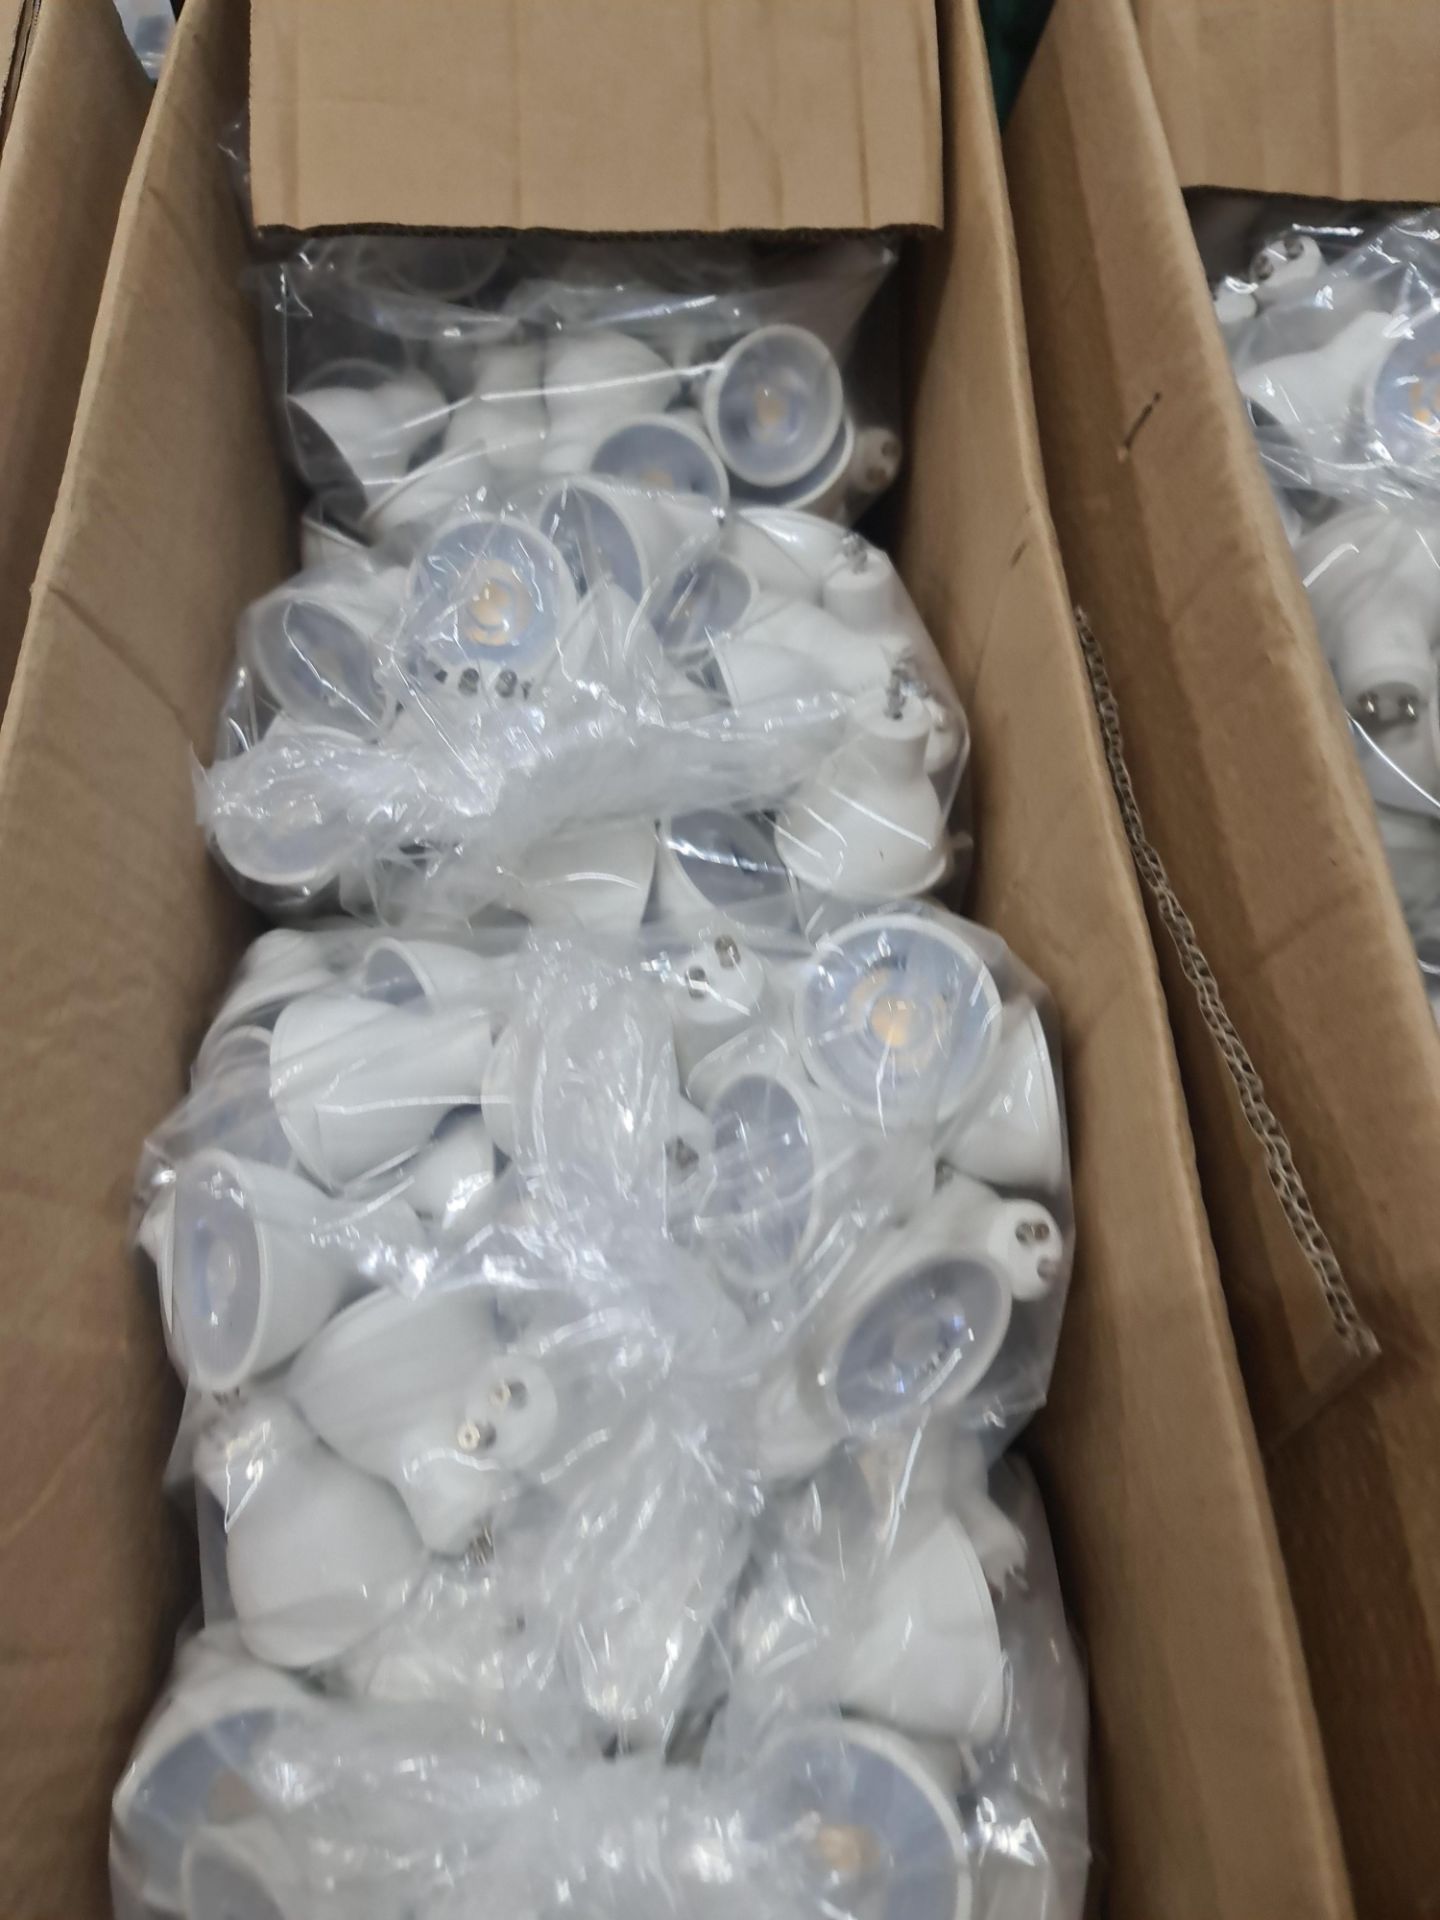 Approximately 200 GU10 LED dimmable 7w bulbs, 4000k